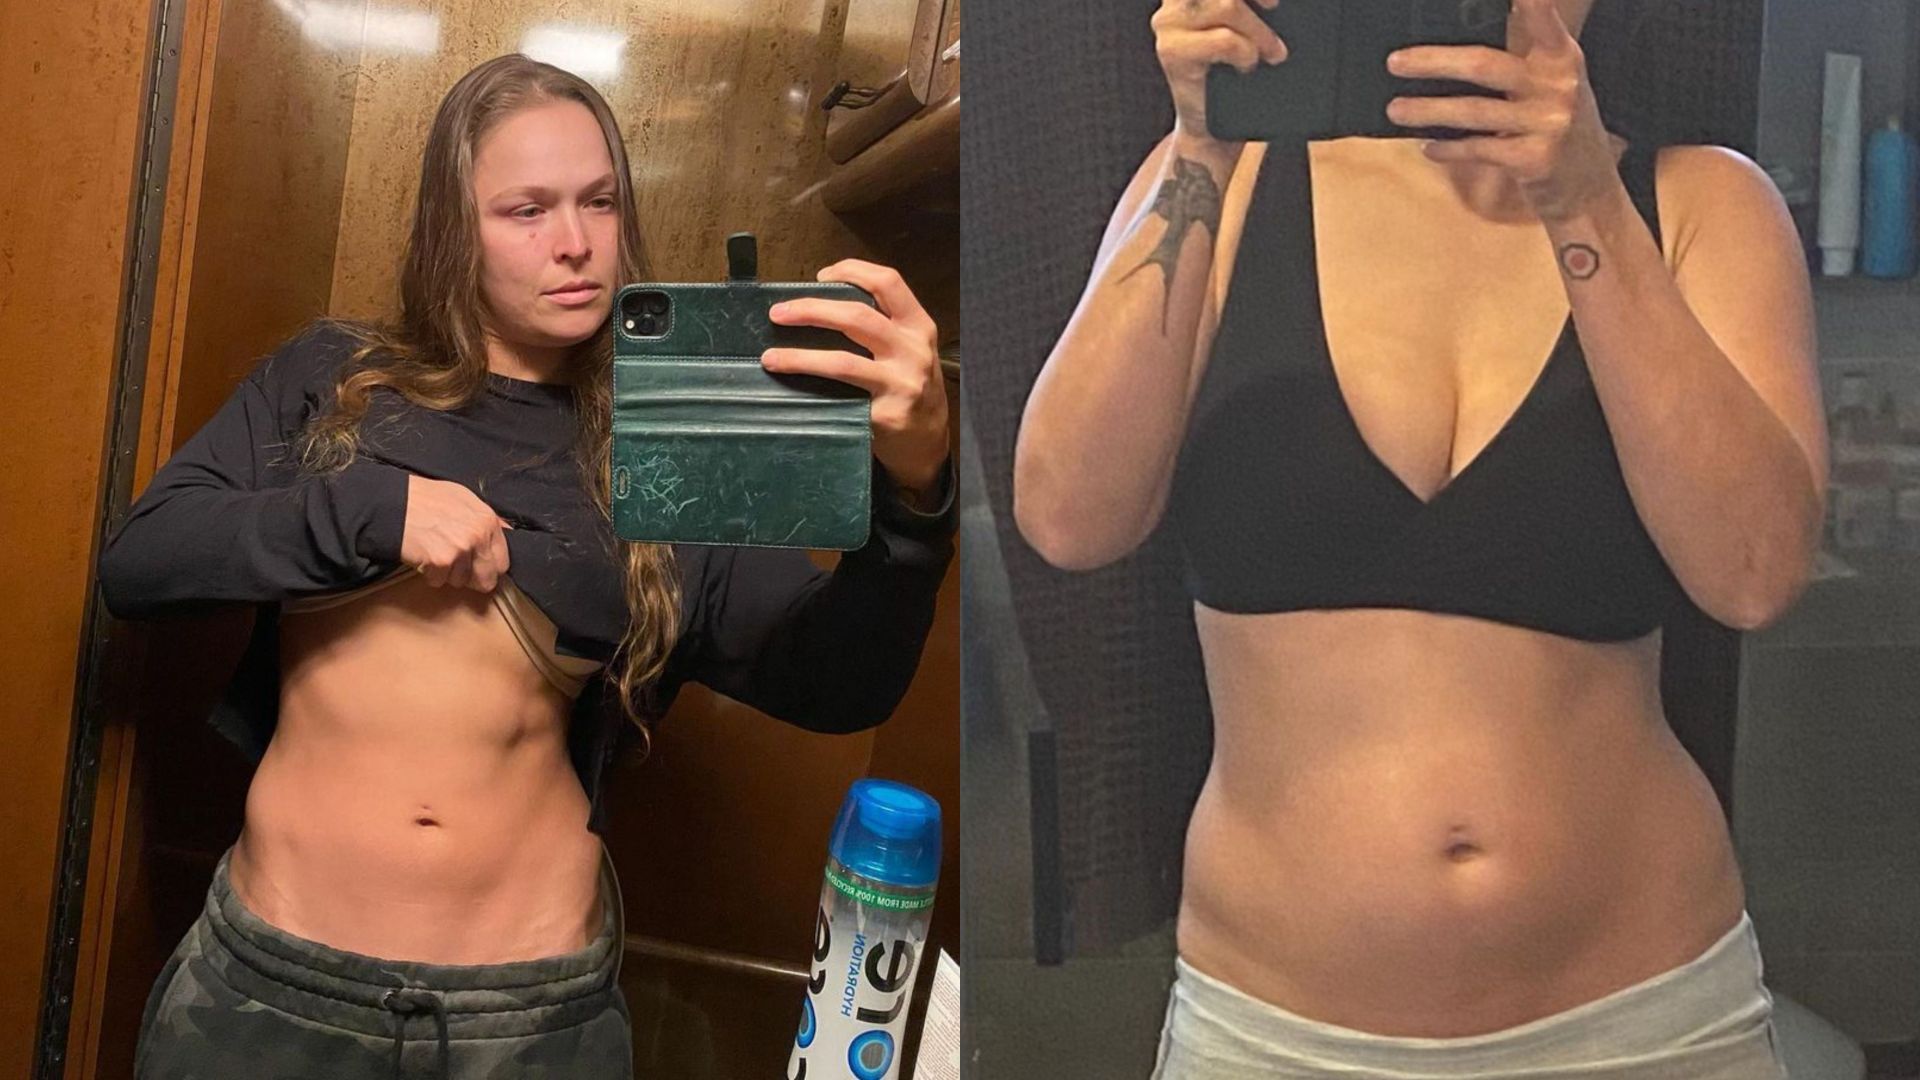 Ronda Rousey has undergone an incredible body transformation